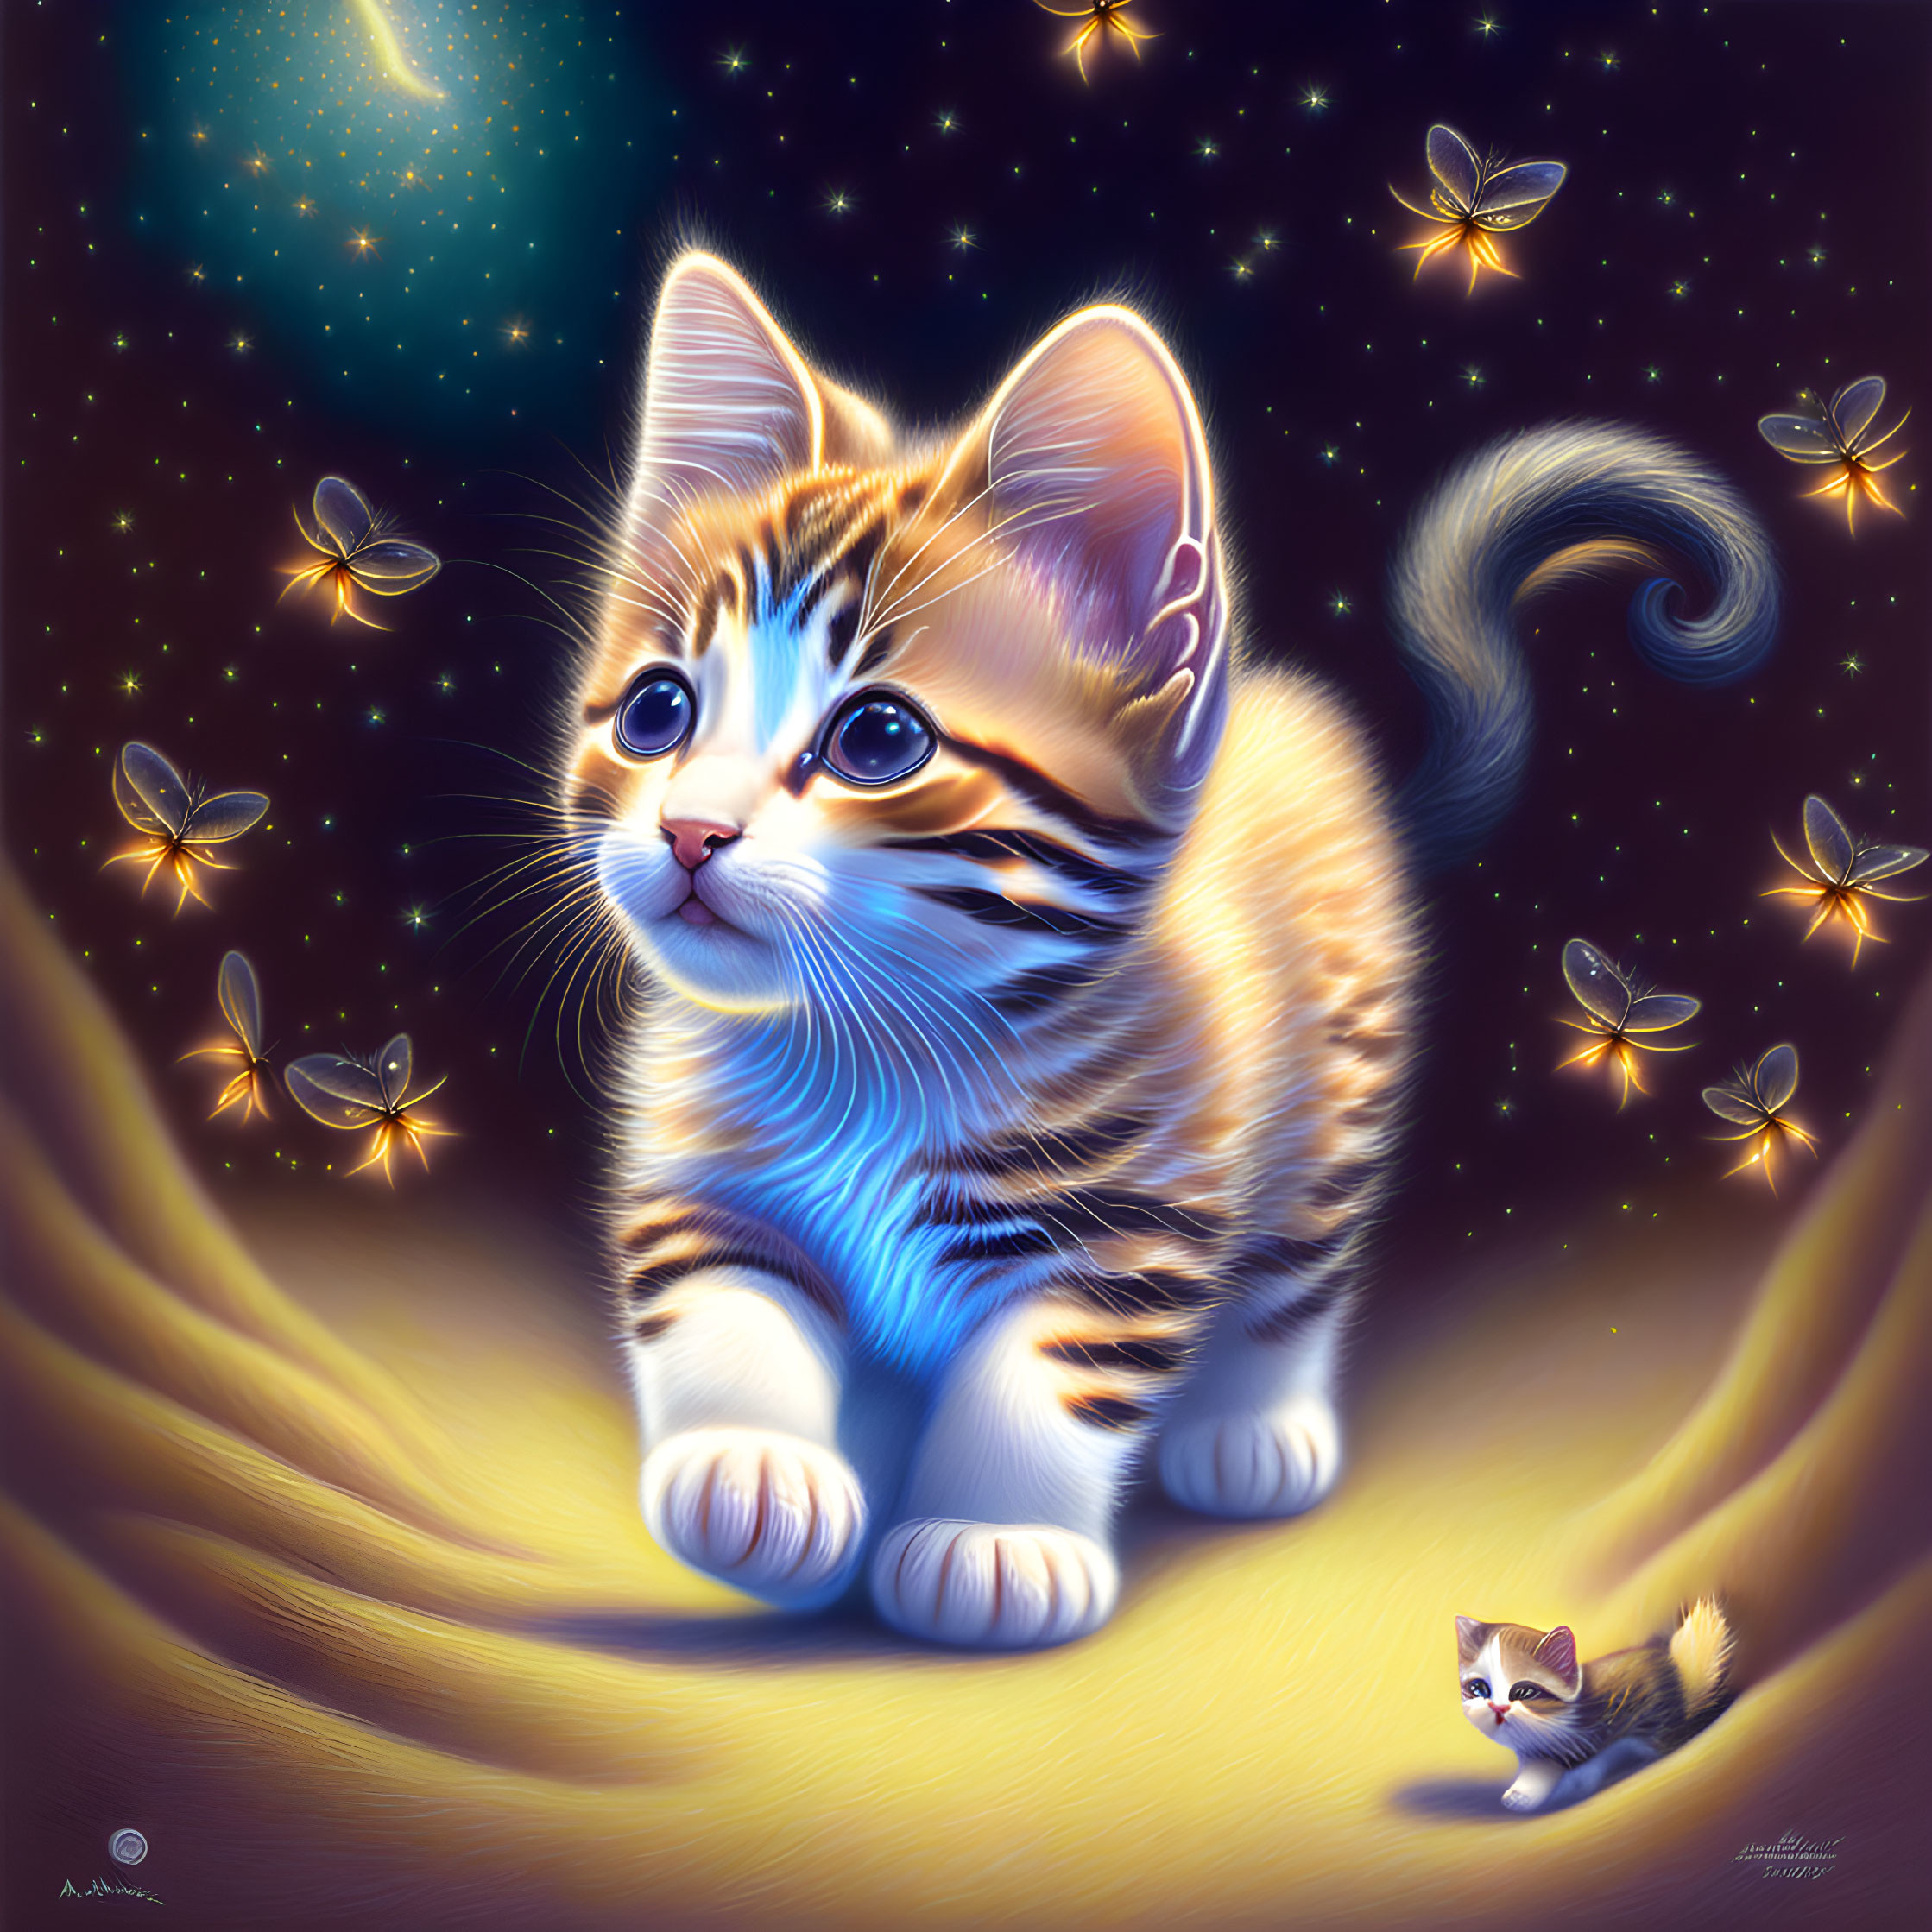 Whimsical kitten with blue eyes among fireflies and mouse under starry sky